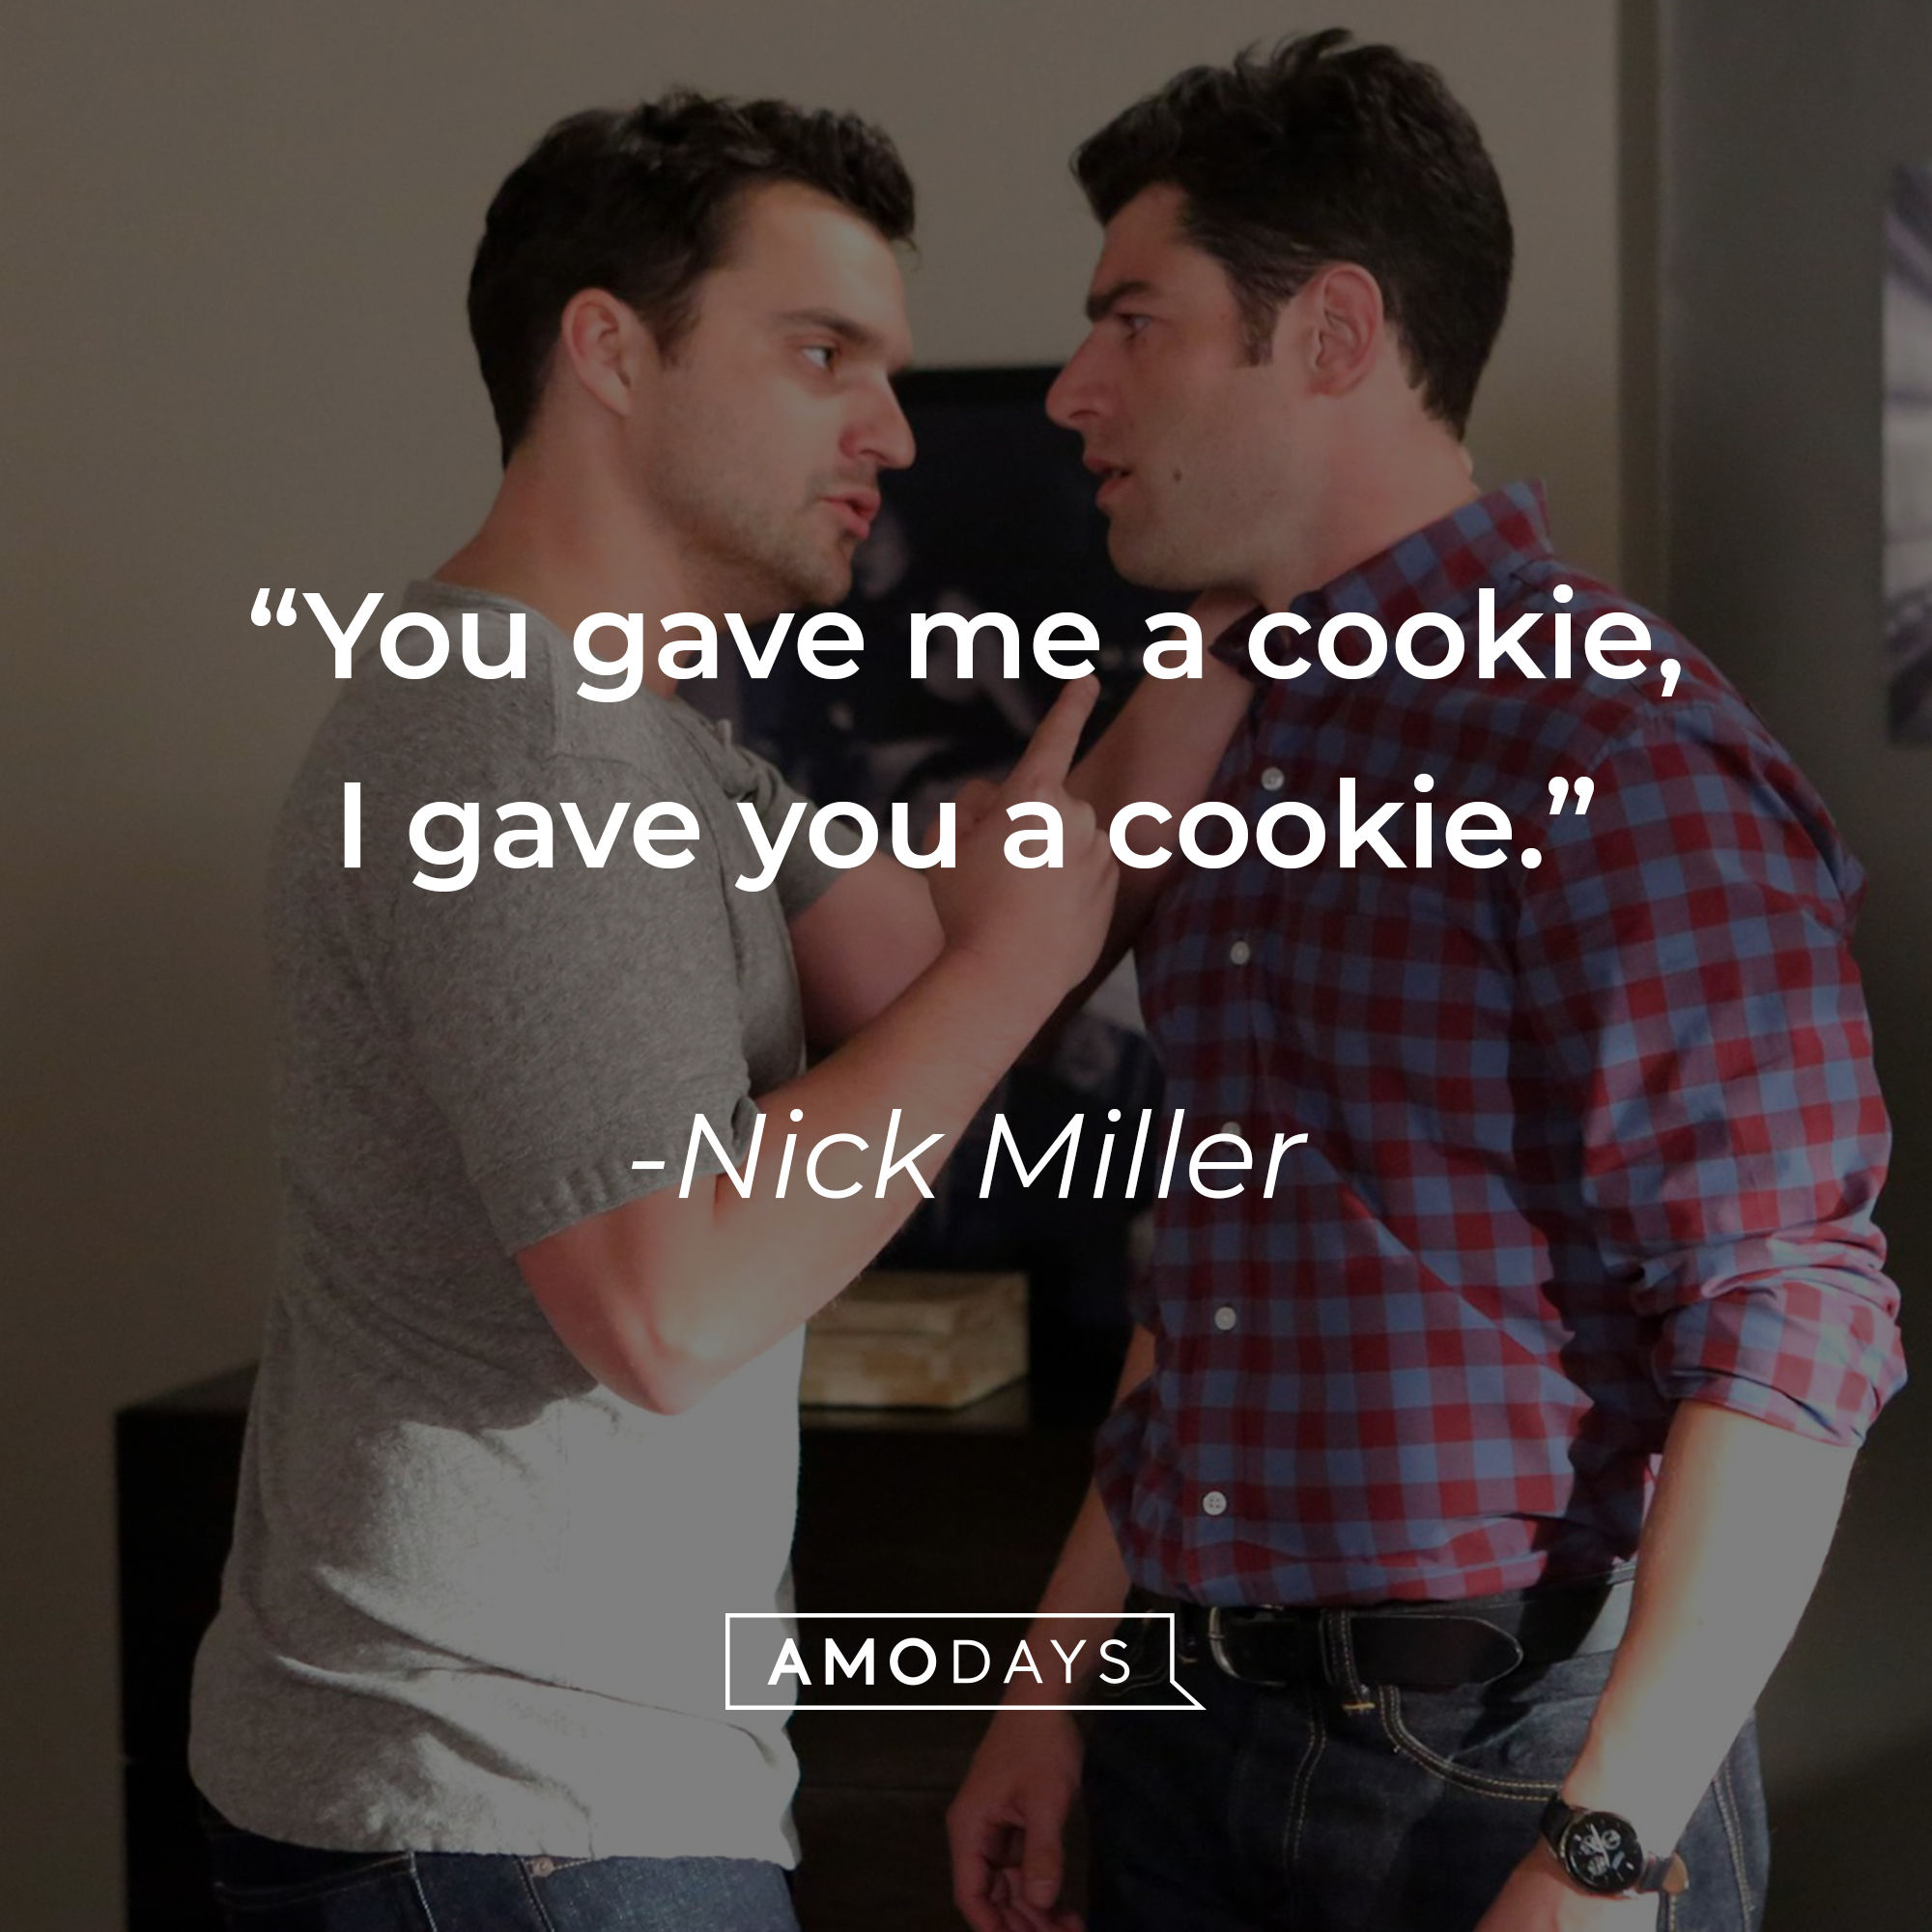 Nick Miller and Schmidt with Miller’s quote: “You gave me a cookie, I gave you a cookie.” | Source: facebook.com/OfficialNewGirl